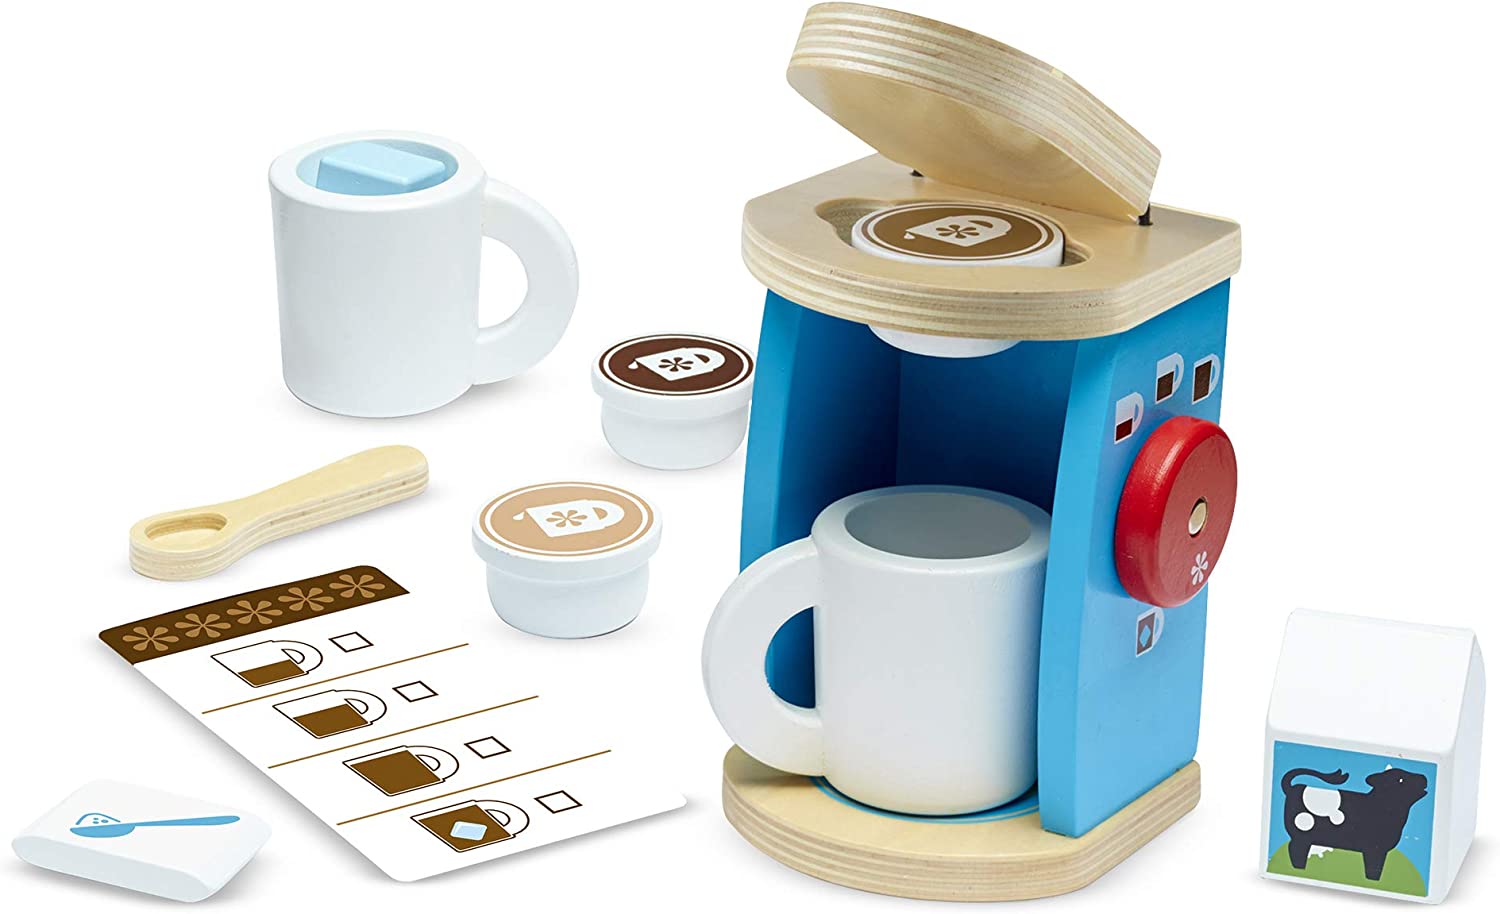 Melissa & Doug 19842 Wooden Coffee Brew and Serve